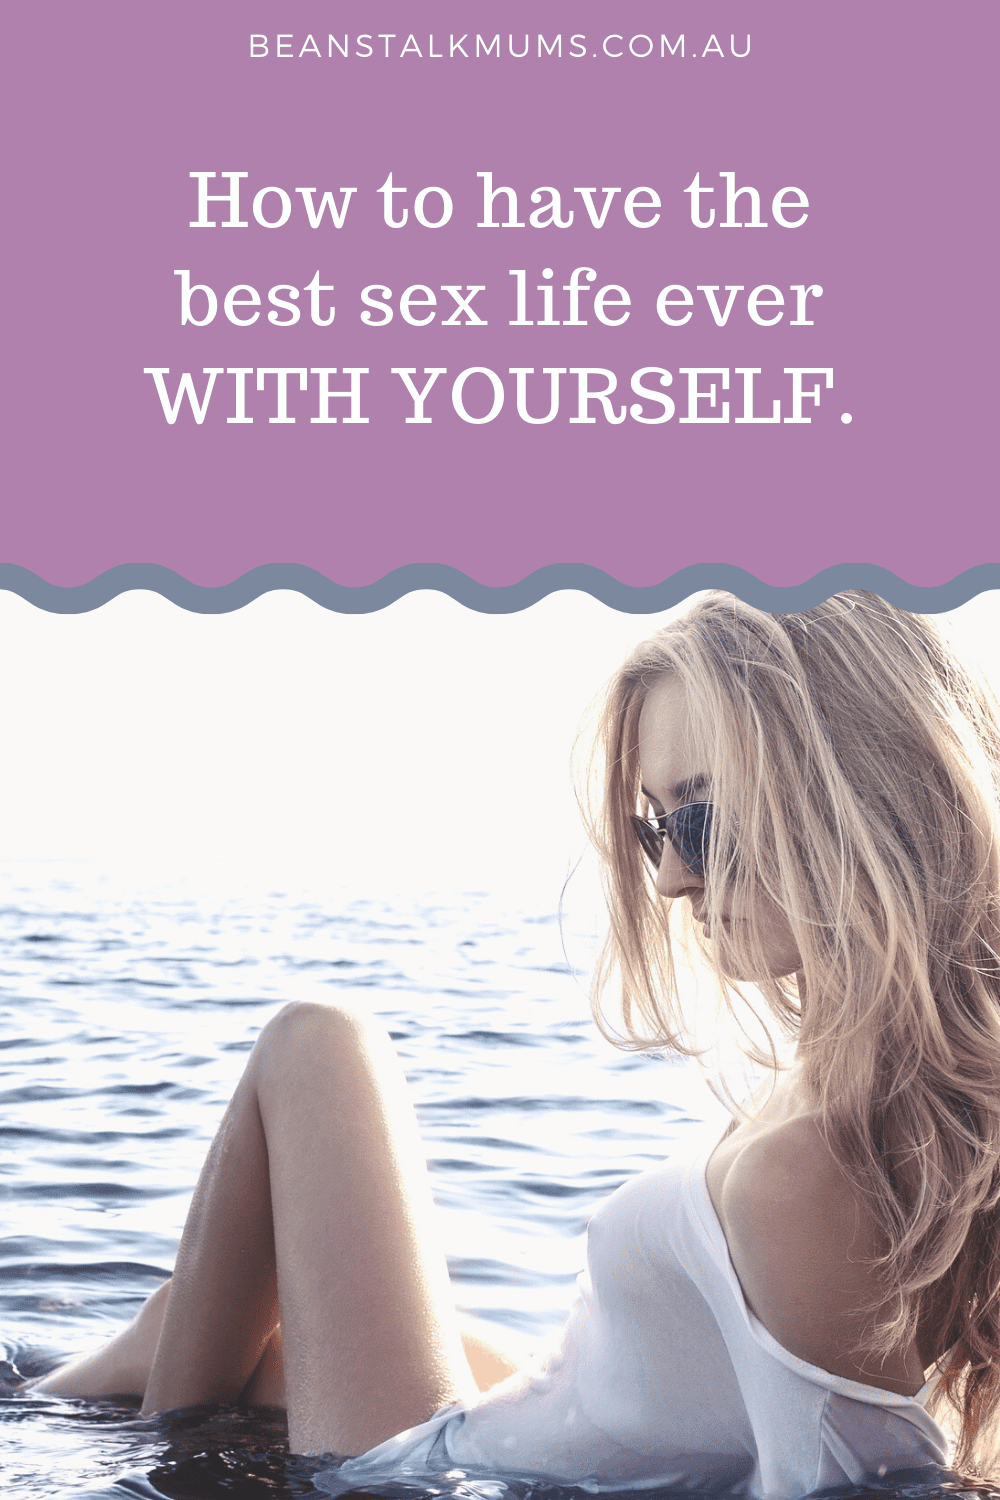 Sex life with yourself | Beanstalk Single Mums Pinterest